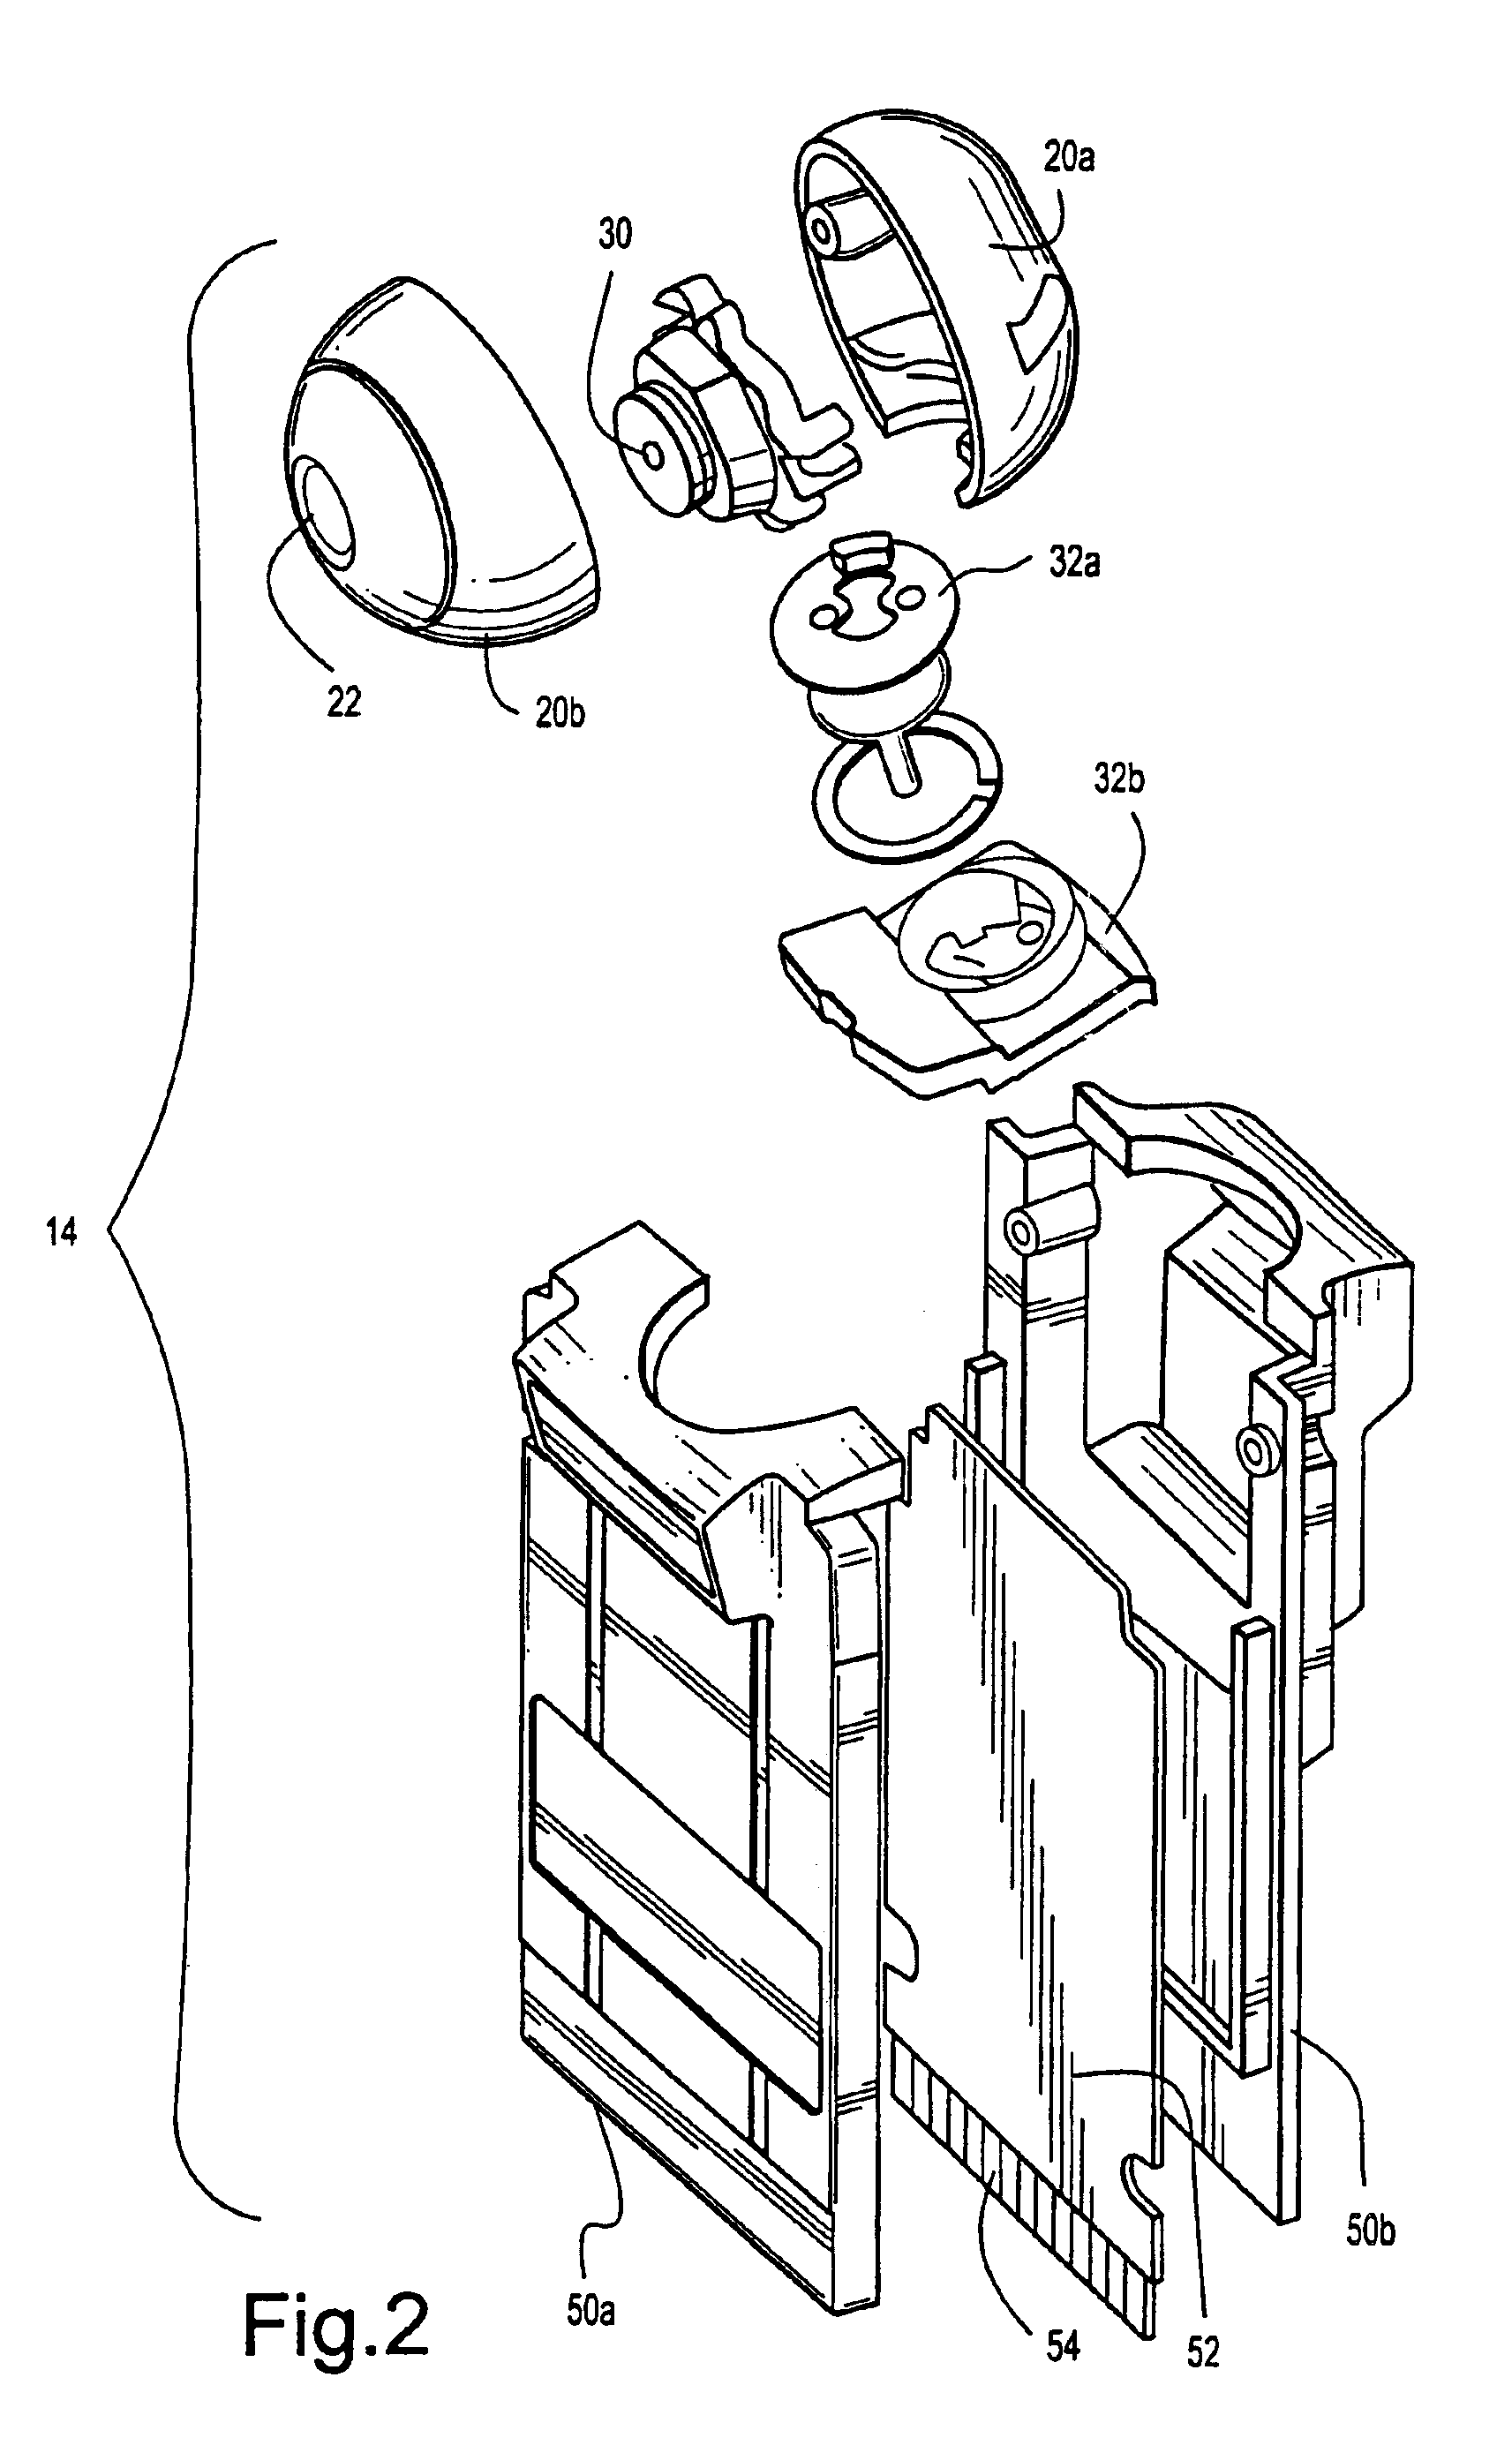 System and method for automatically editing captured images for inclusion into 3D video game play